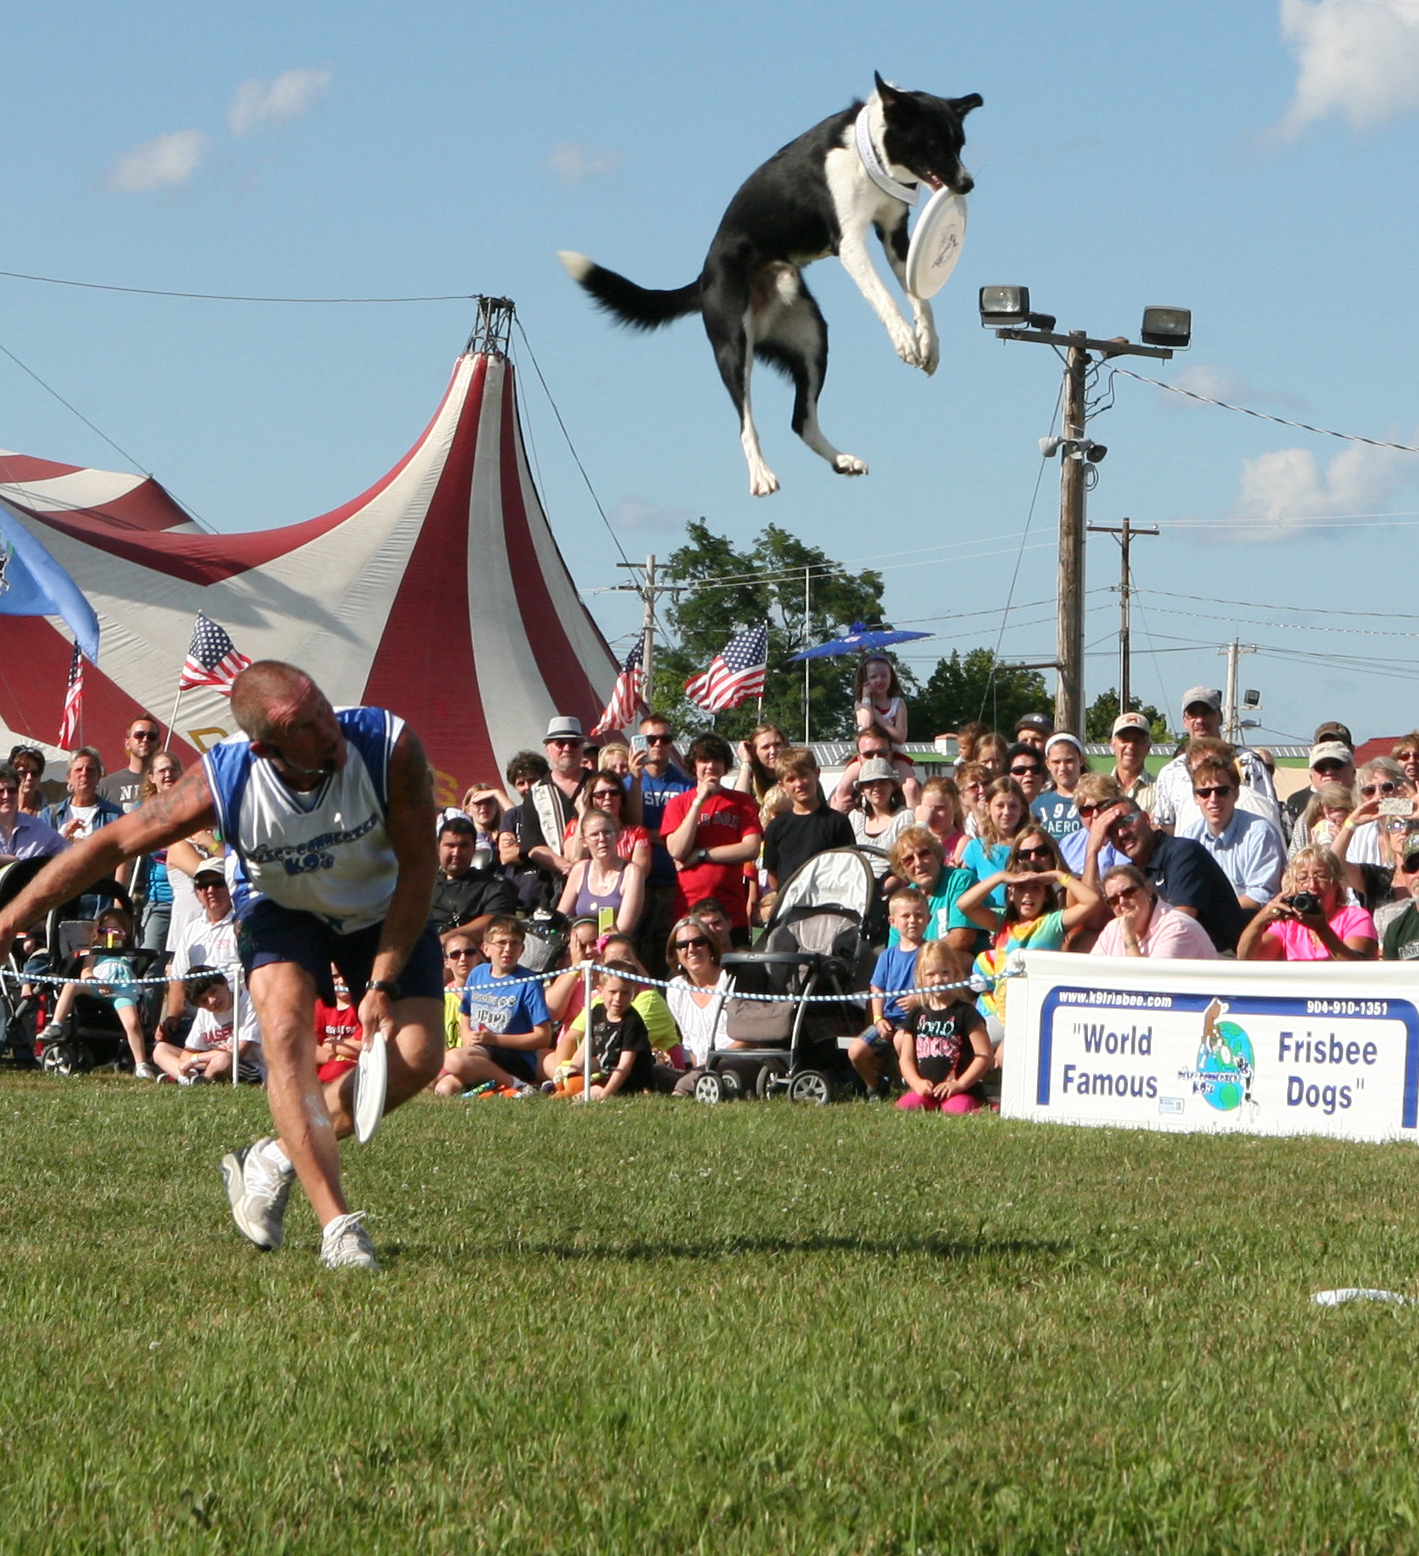 Don't Miss the Disc-Connected K9s, World Famous Frisbee Dogs